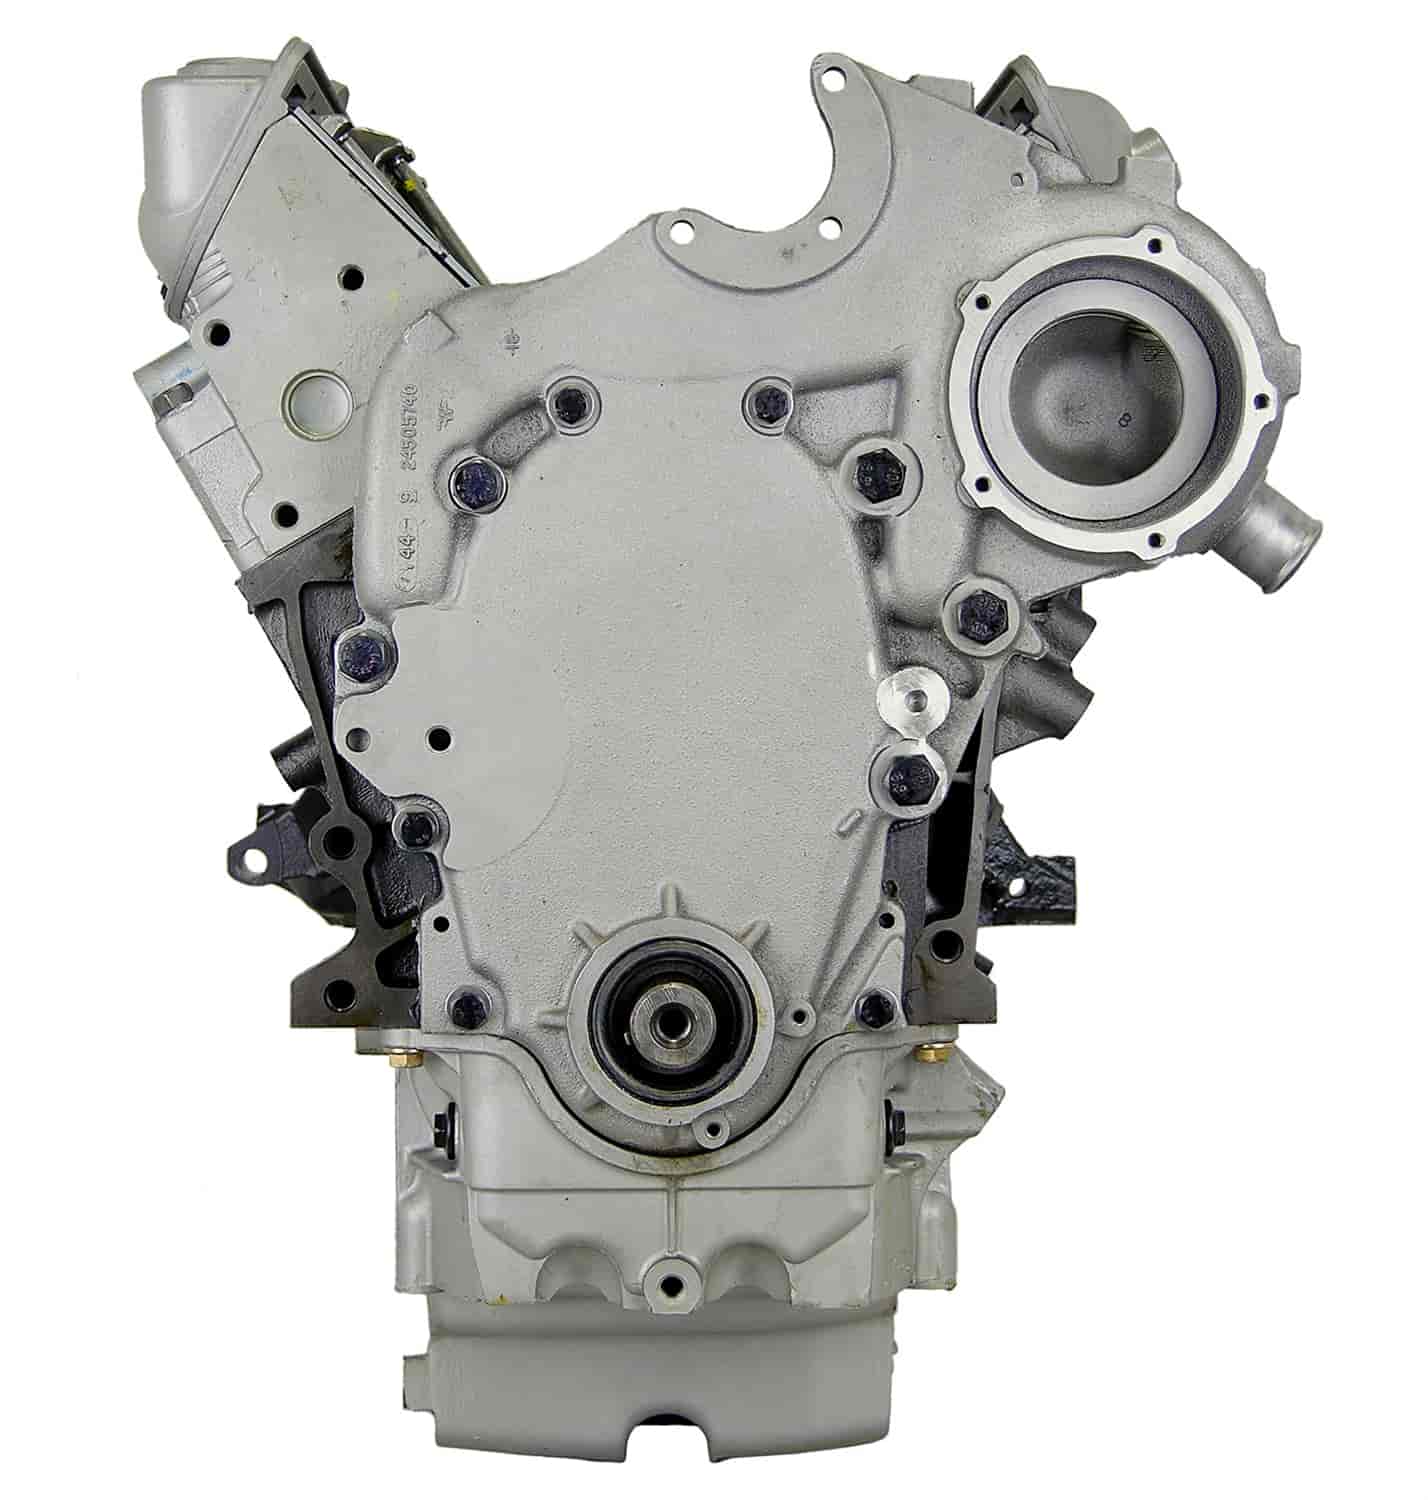 Remanufactured Crate Engine for 1996-1999 Chevy/Buick/Olds/Pontiac with 3.1L V6